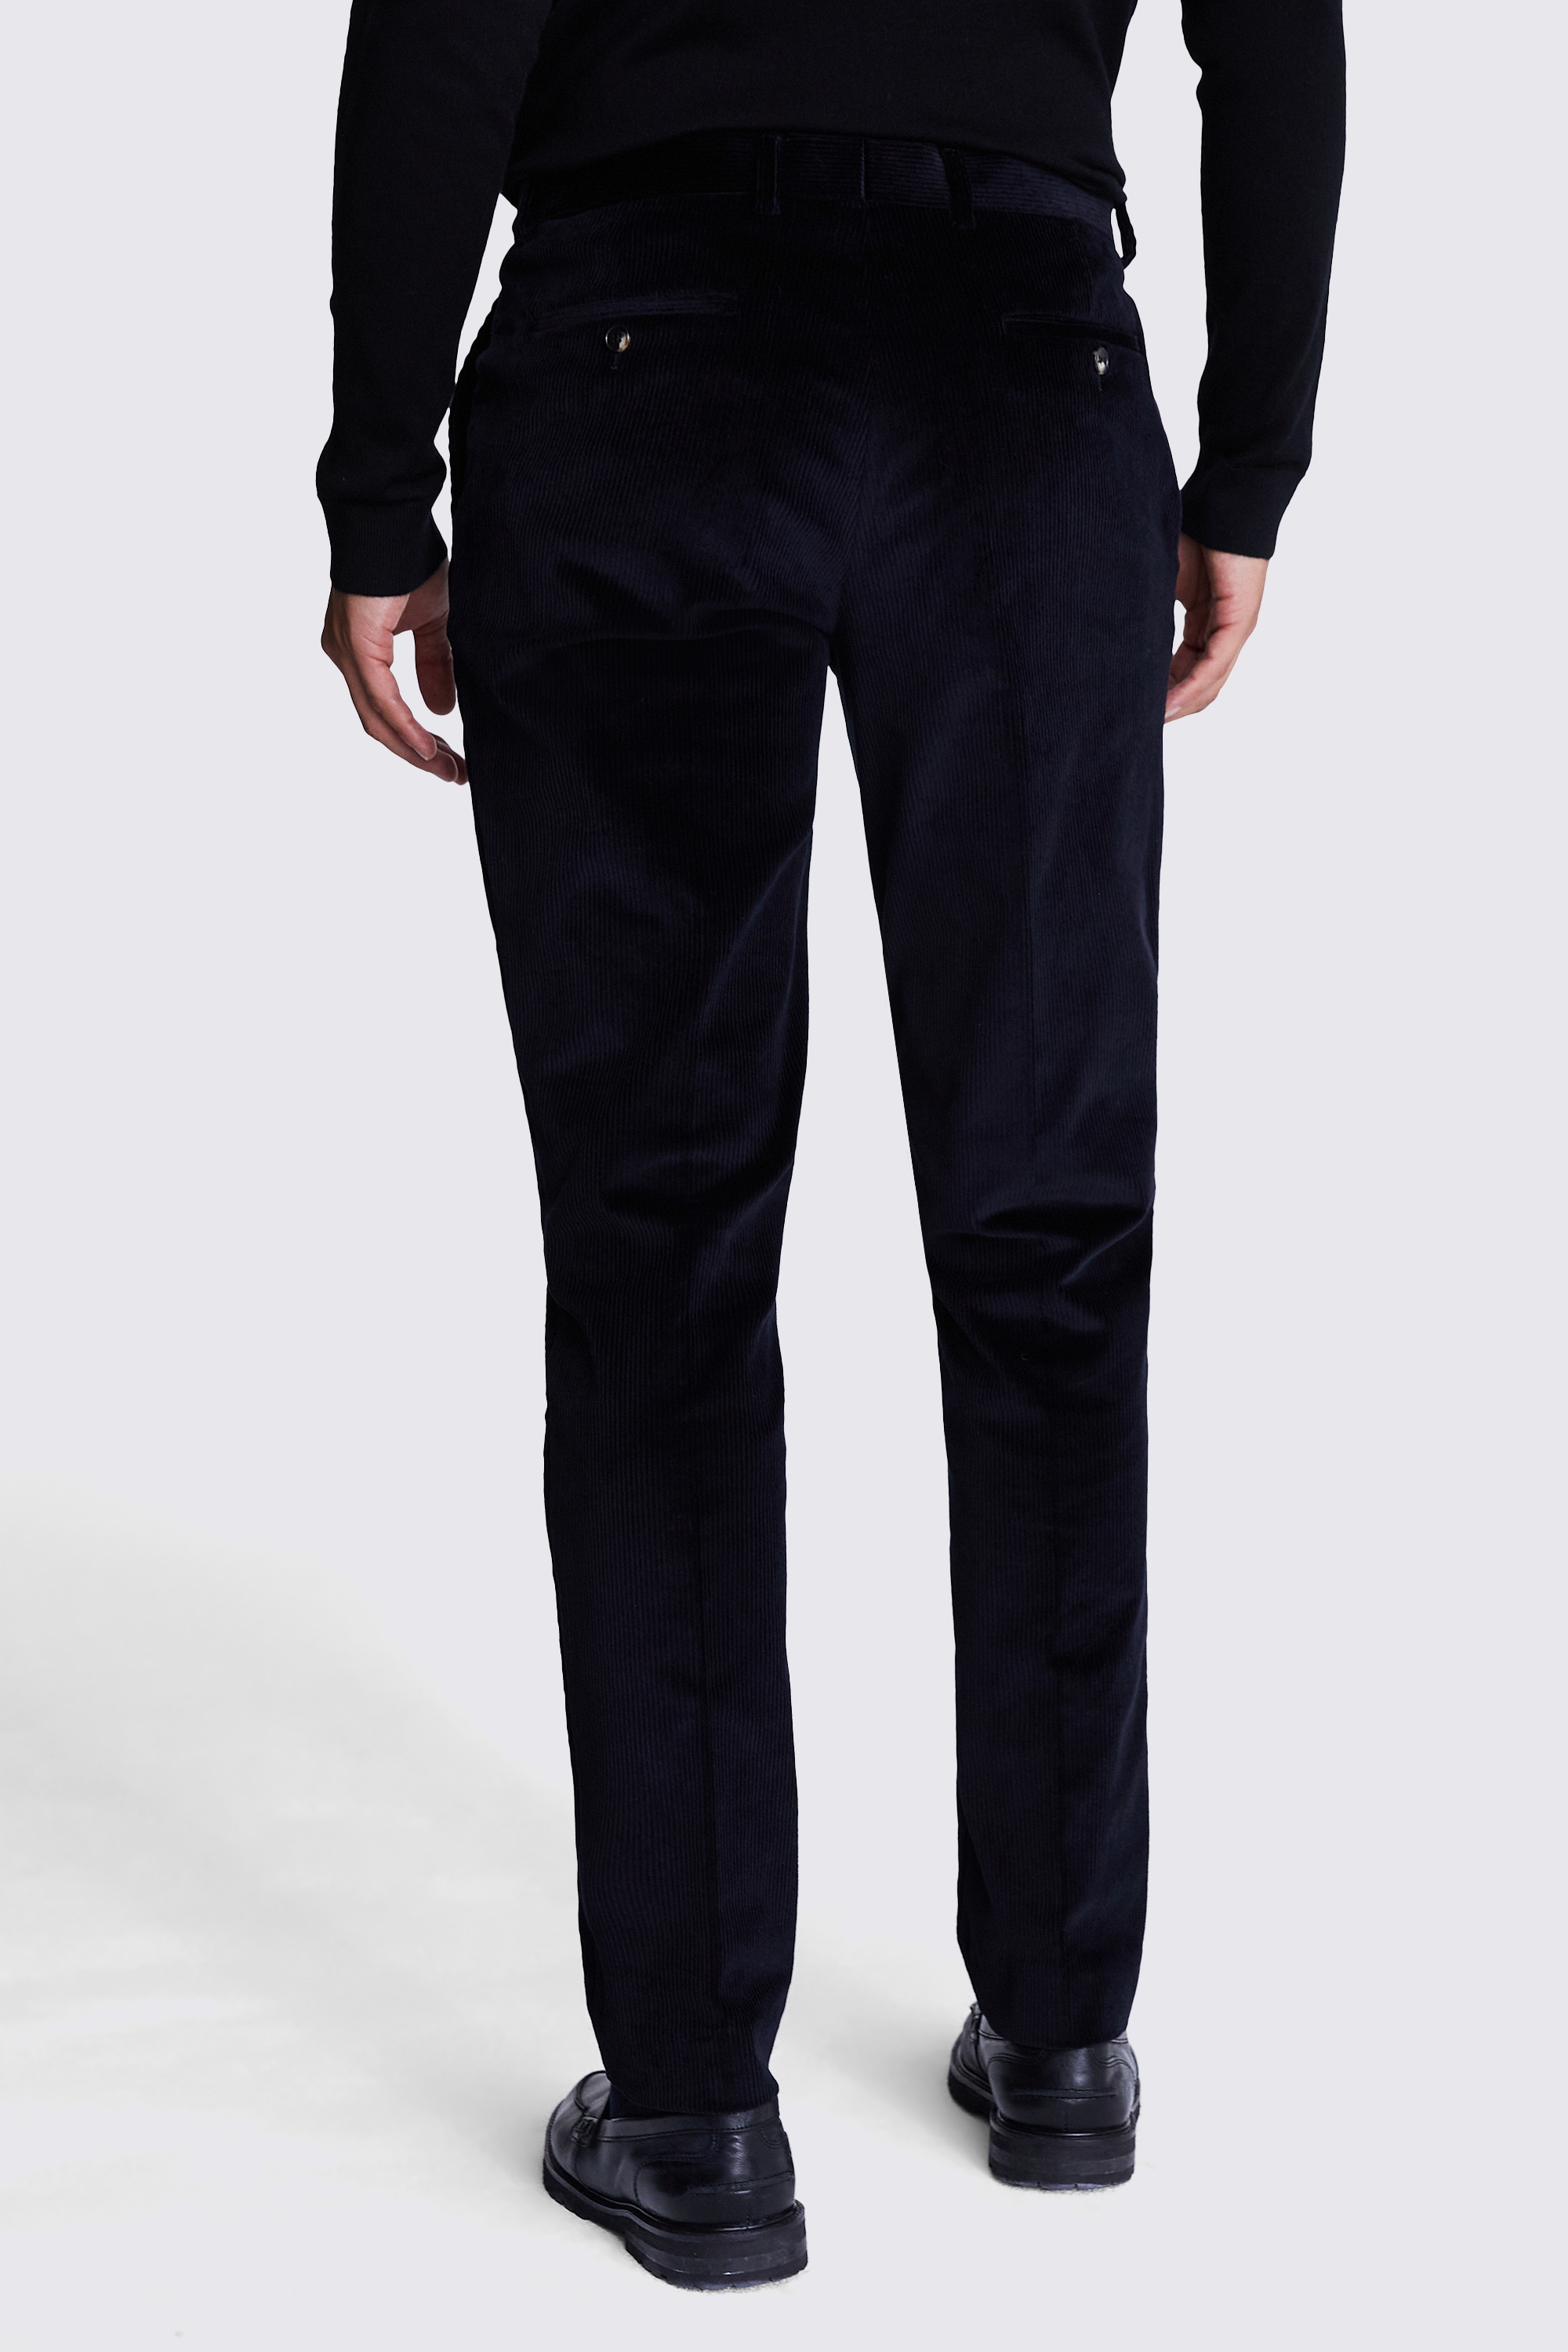 Slim Fit Ink Corduroy Trousers | Buy Online at Moss